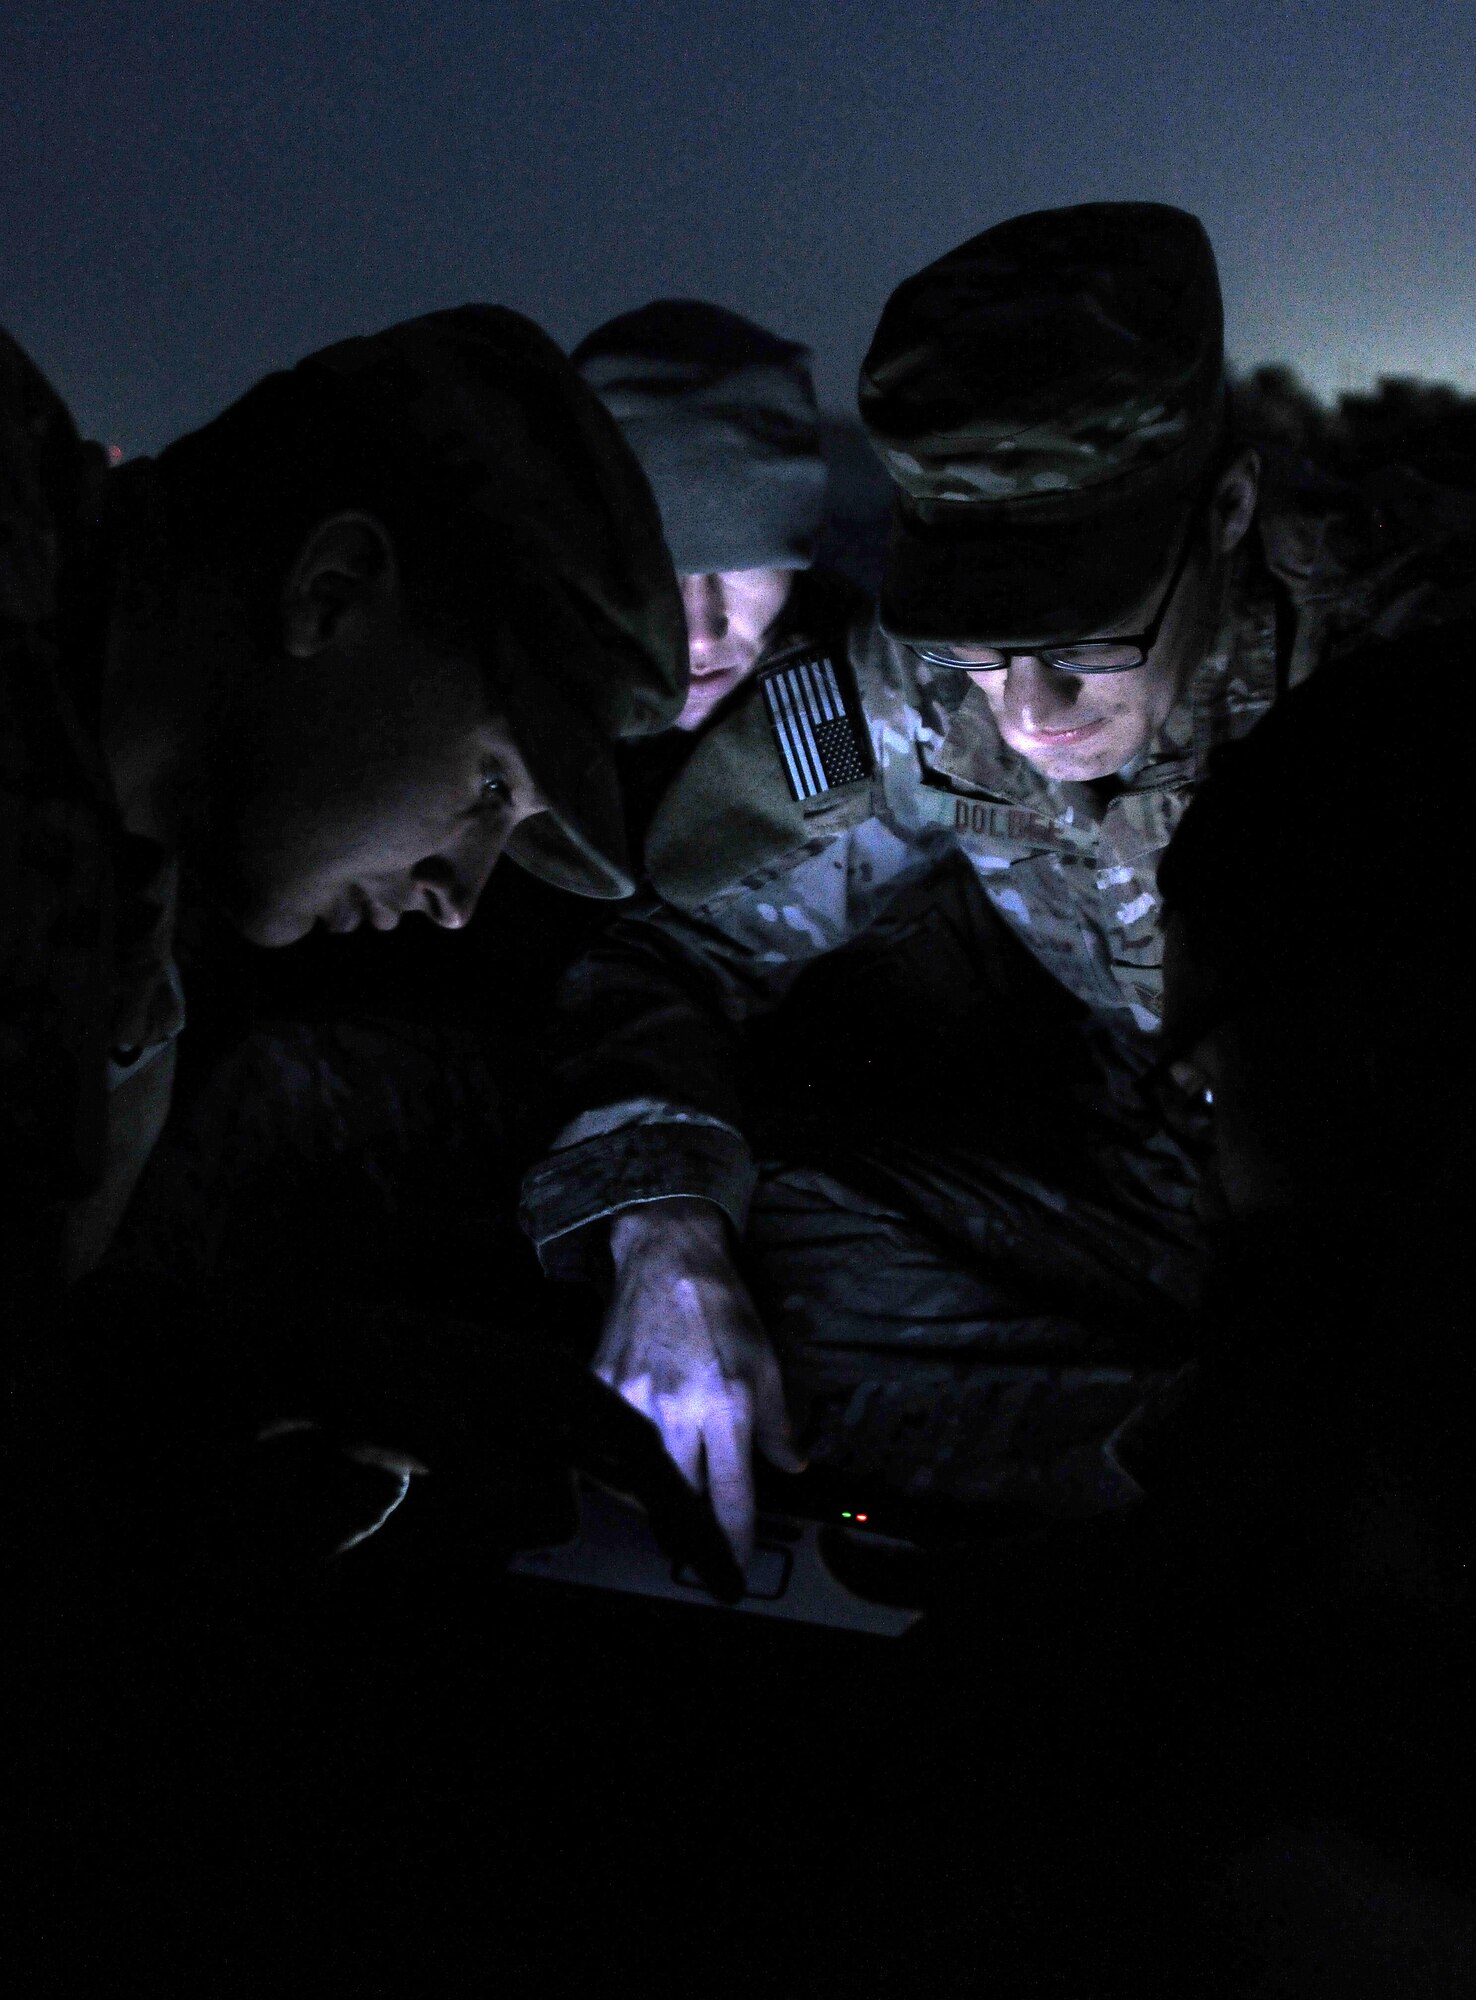 Staff Sgt. Craig Ritter, 1st Lt. Joshua Loomis, Tech. Sgt. John Dolbee, and Staff Sgt. Ben DeSantiago, 755th Expeditionary Security Forces Squadron Reaper team trackers, monitor enemy movement and detection sensors at Bagram Airfield, Afghanistan, Feb. 14, 2013. The tracker team members are all deployed from the 822nd Base Defense Squadron, Moody Air Force Base, Ga. (U.S. Air Force photo/Senior Airman Chris Willis)